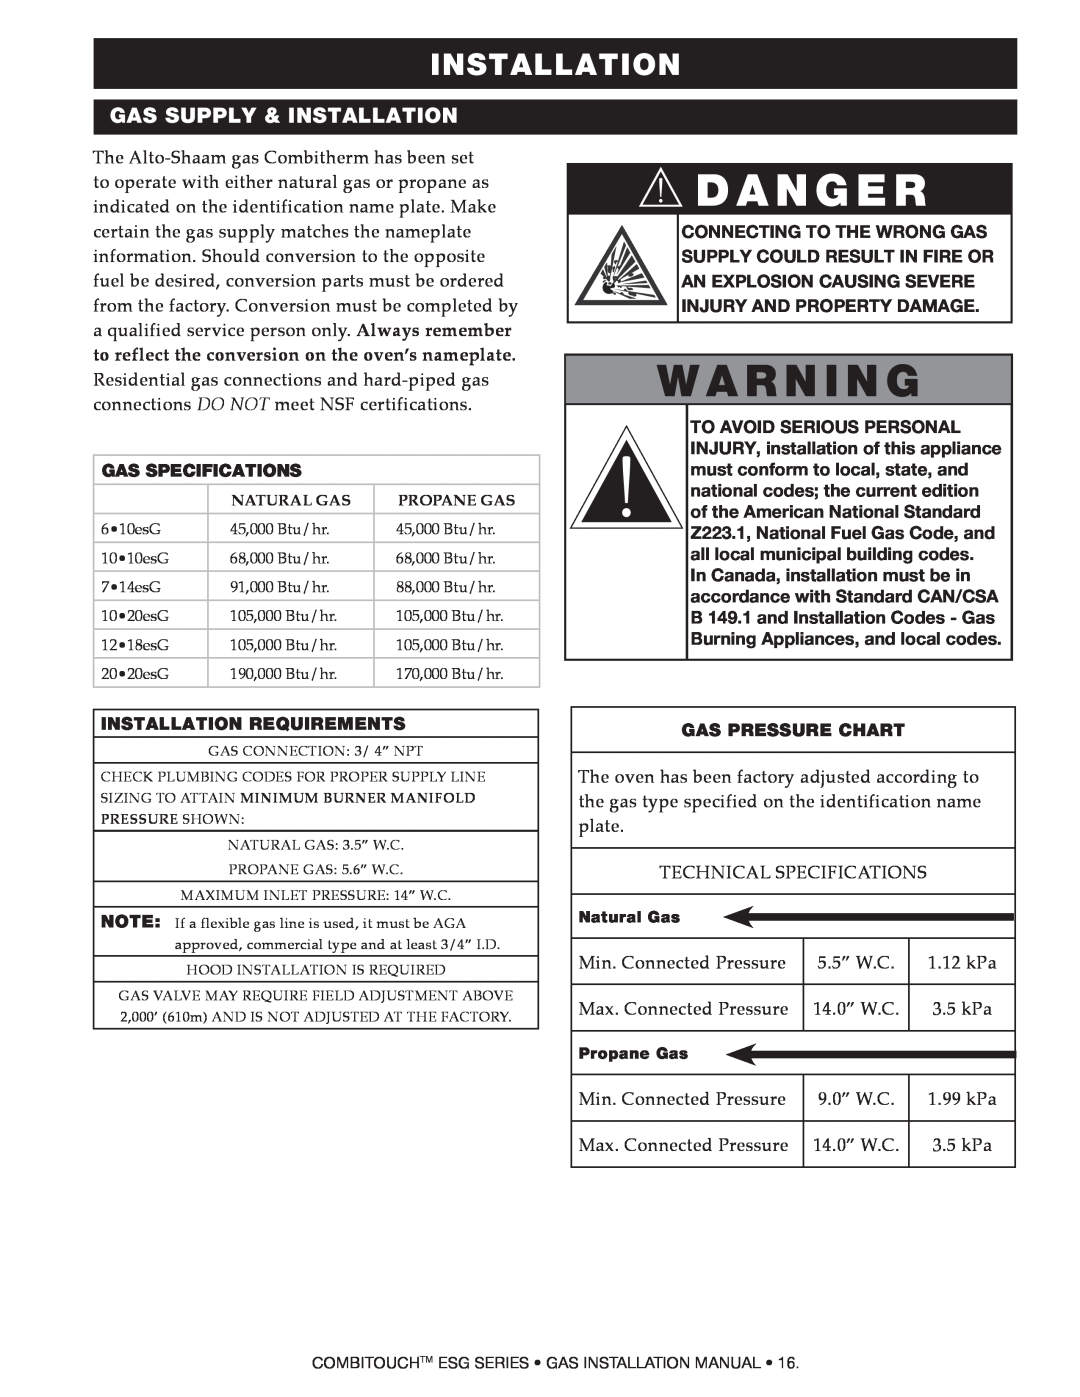 Alto-Shaam 1218ESG Gas Supply & Installation, Danger, Gas Specifications, Installation Requirements, Gas Pressure Chart 